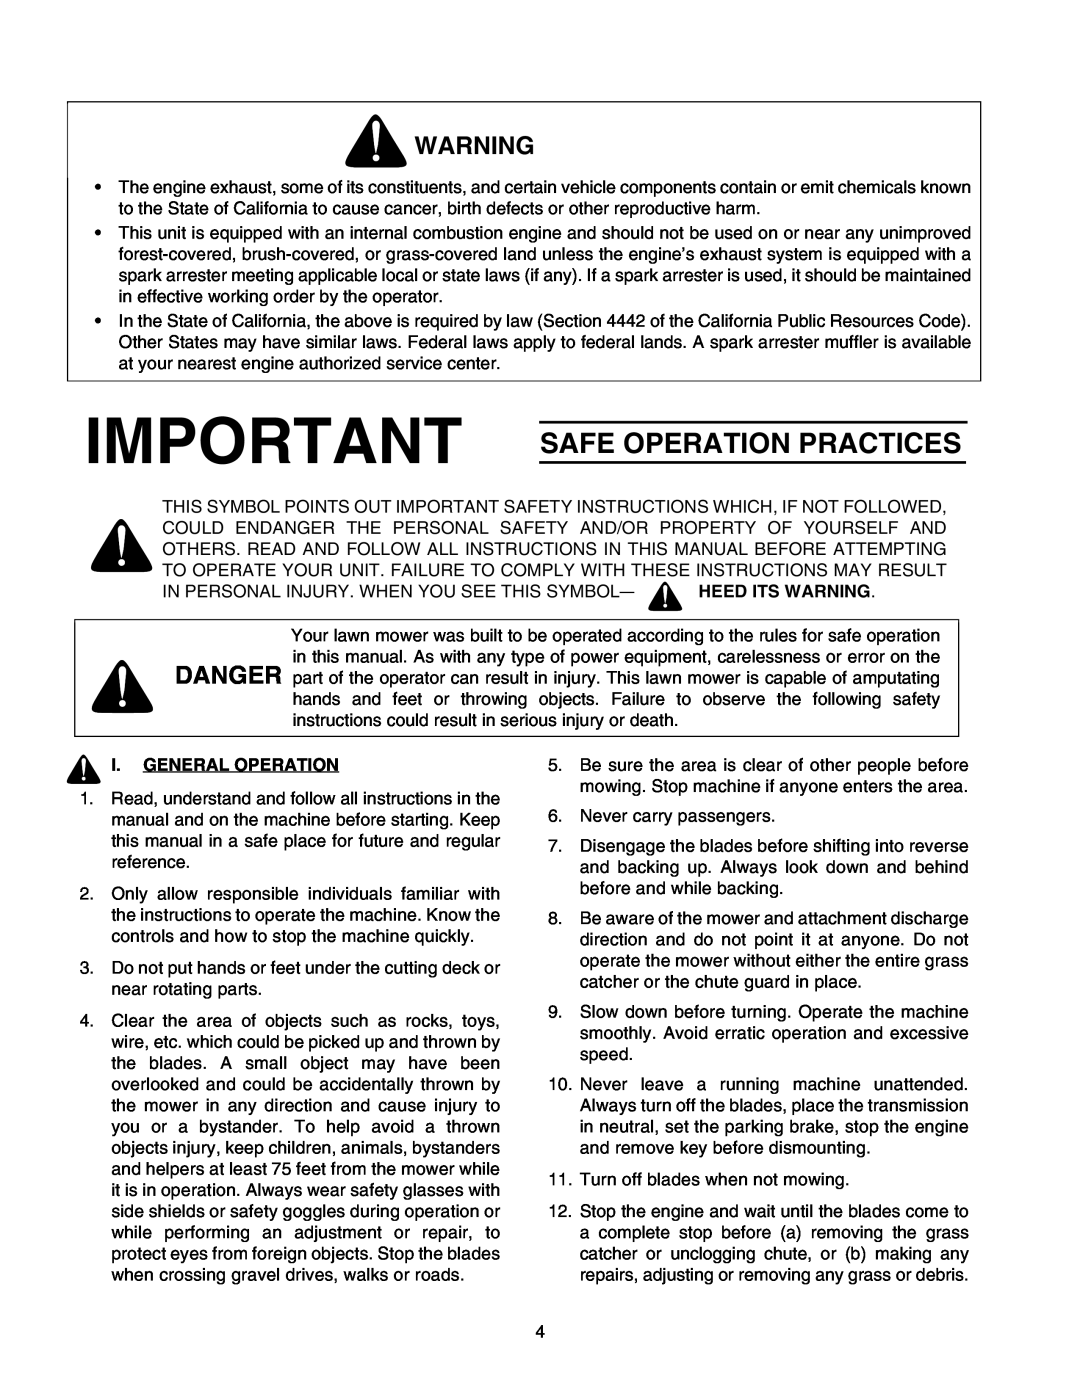 Cub Cadet RZT 50 manual I. General Operation, Safe Operation Practices 